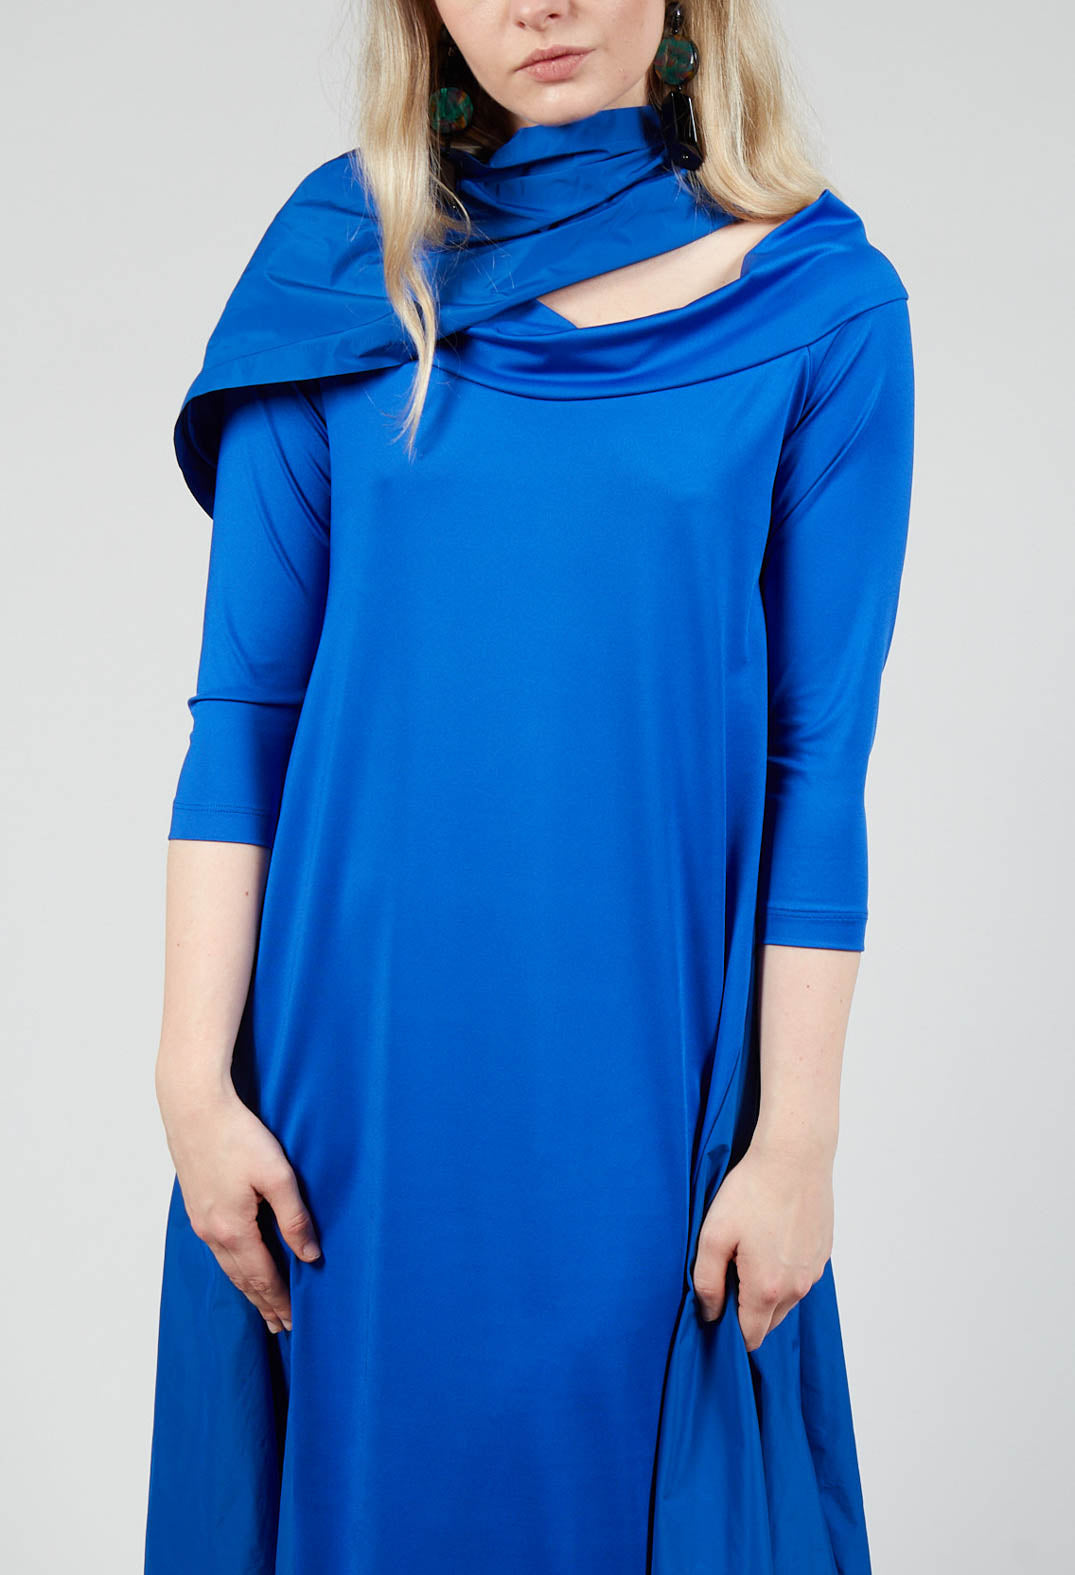 TOTO Dress in Royal Blue